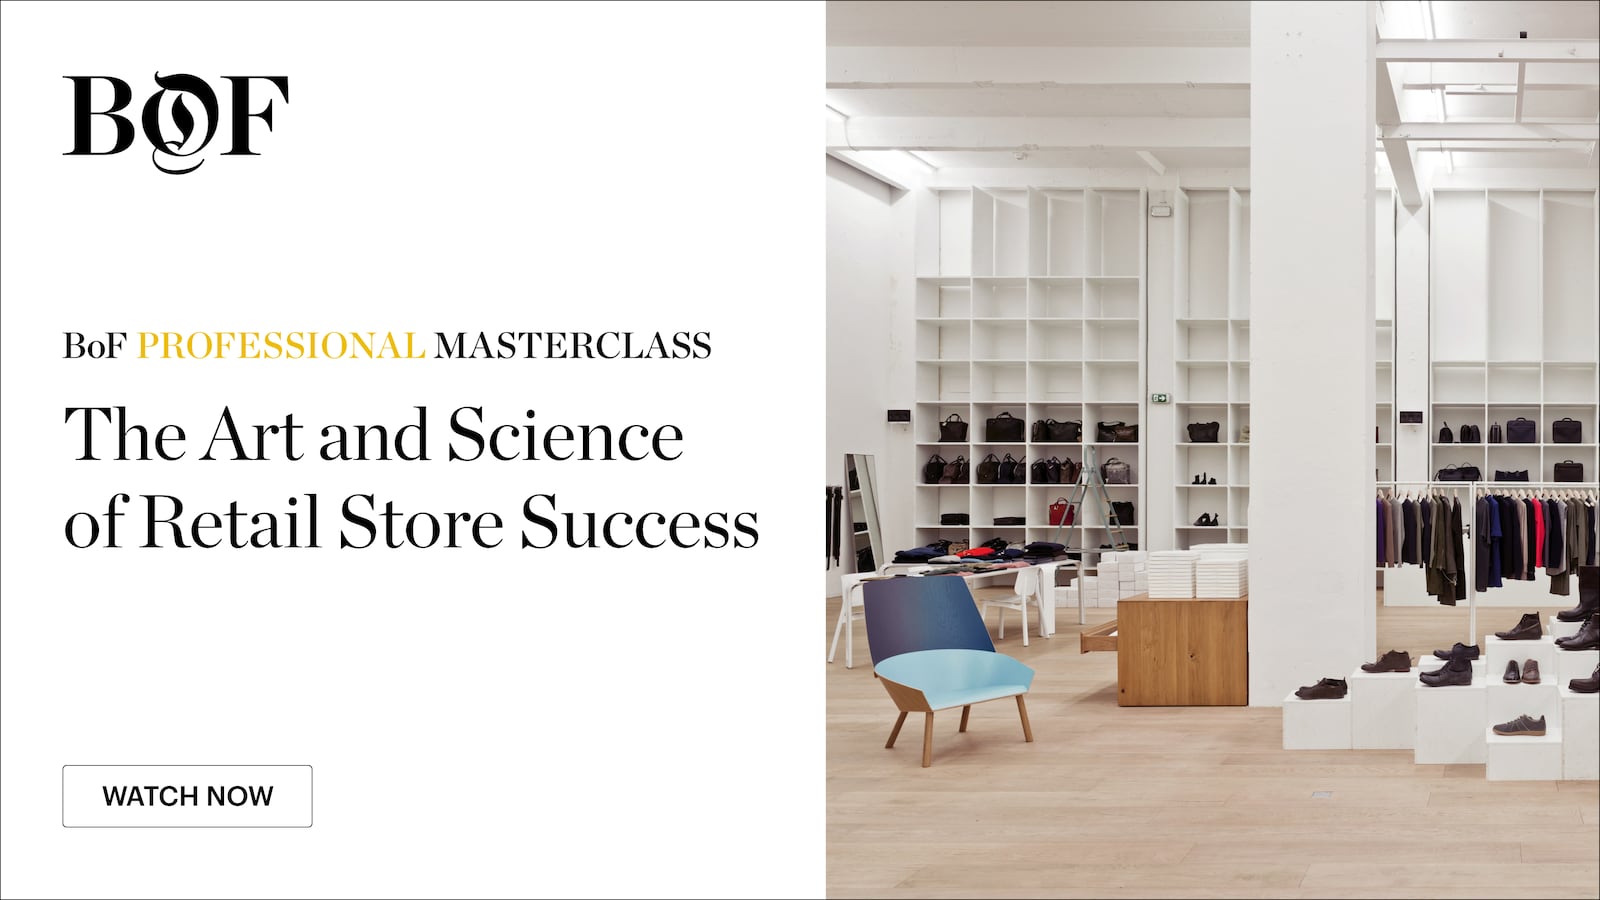 BoF Masterclass | The Art and Science of Retail Store Success